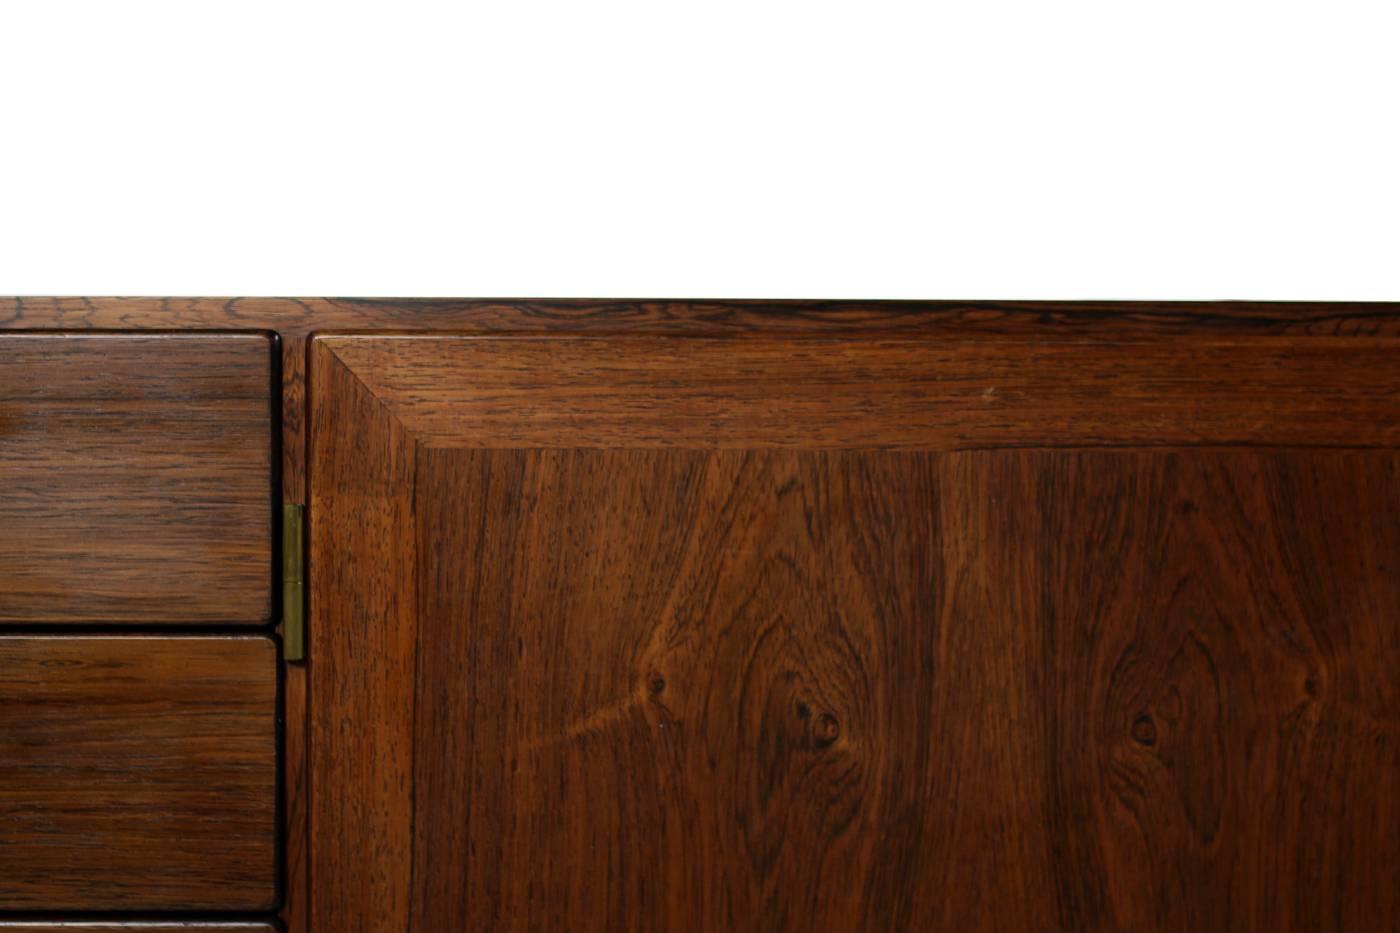 Exclusive 1960s Kai Winding Rosewood Sideboard with Drawers Poul Jeppesen Brass In Excellent Condition For Sale In Hamminkeln, DE